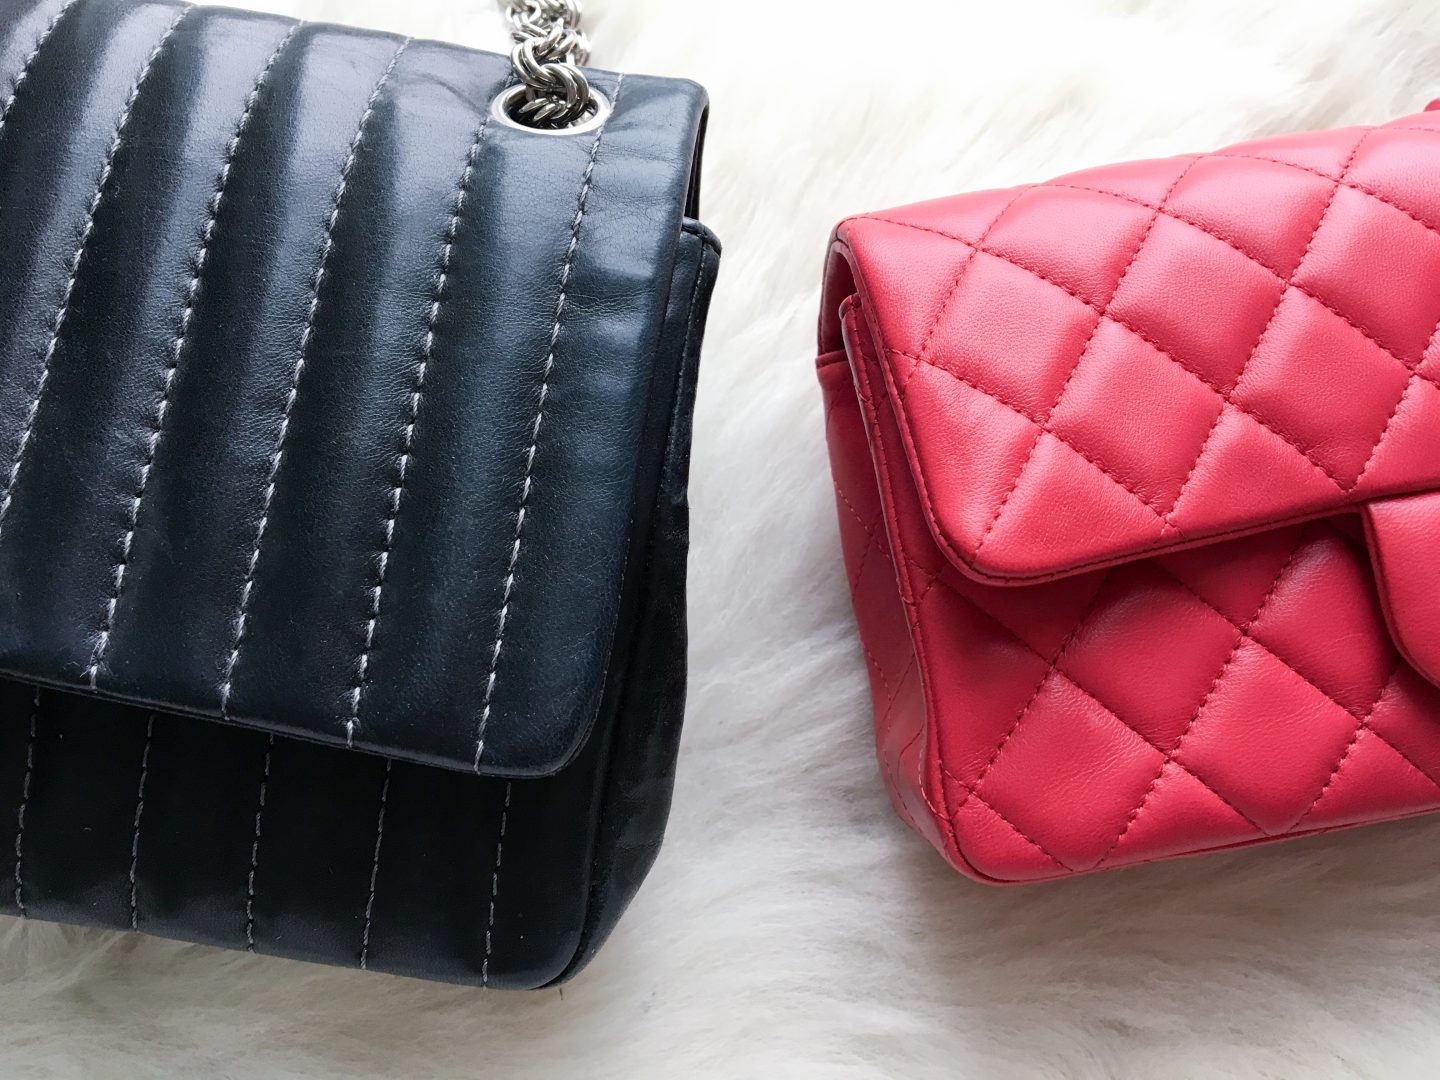 CHANEL SLG comparison l what fits in the mini o case & zipped coin